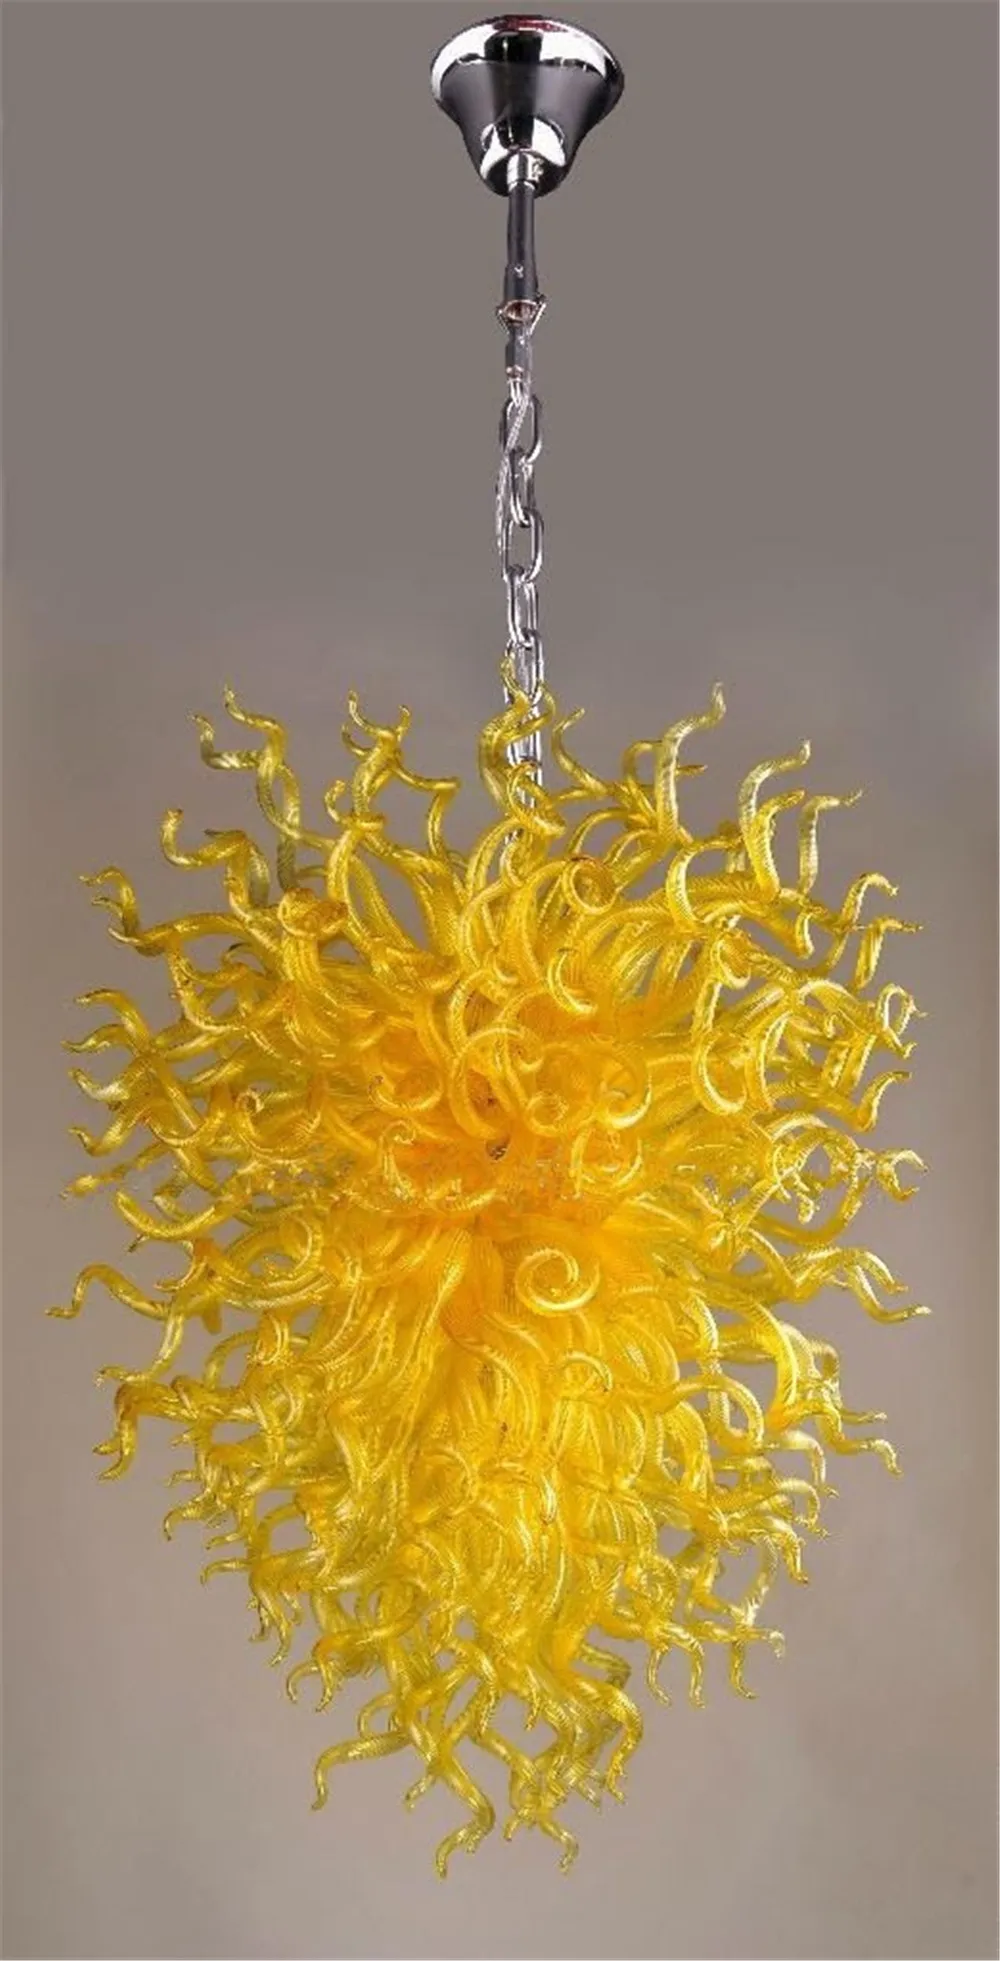 

Bedroom Mini Stained Glass Lamp Yellow Modern 110v-240v LED Chihuly Style Chandeliers